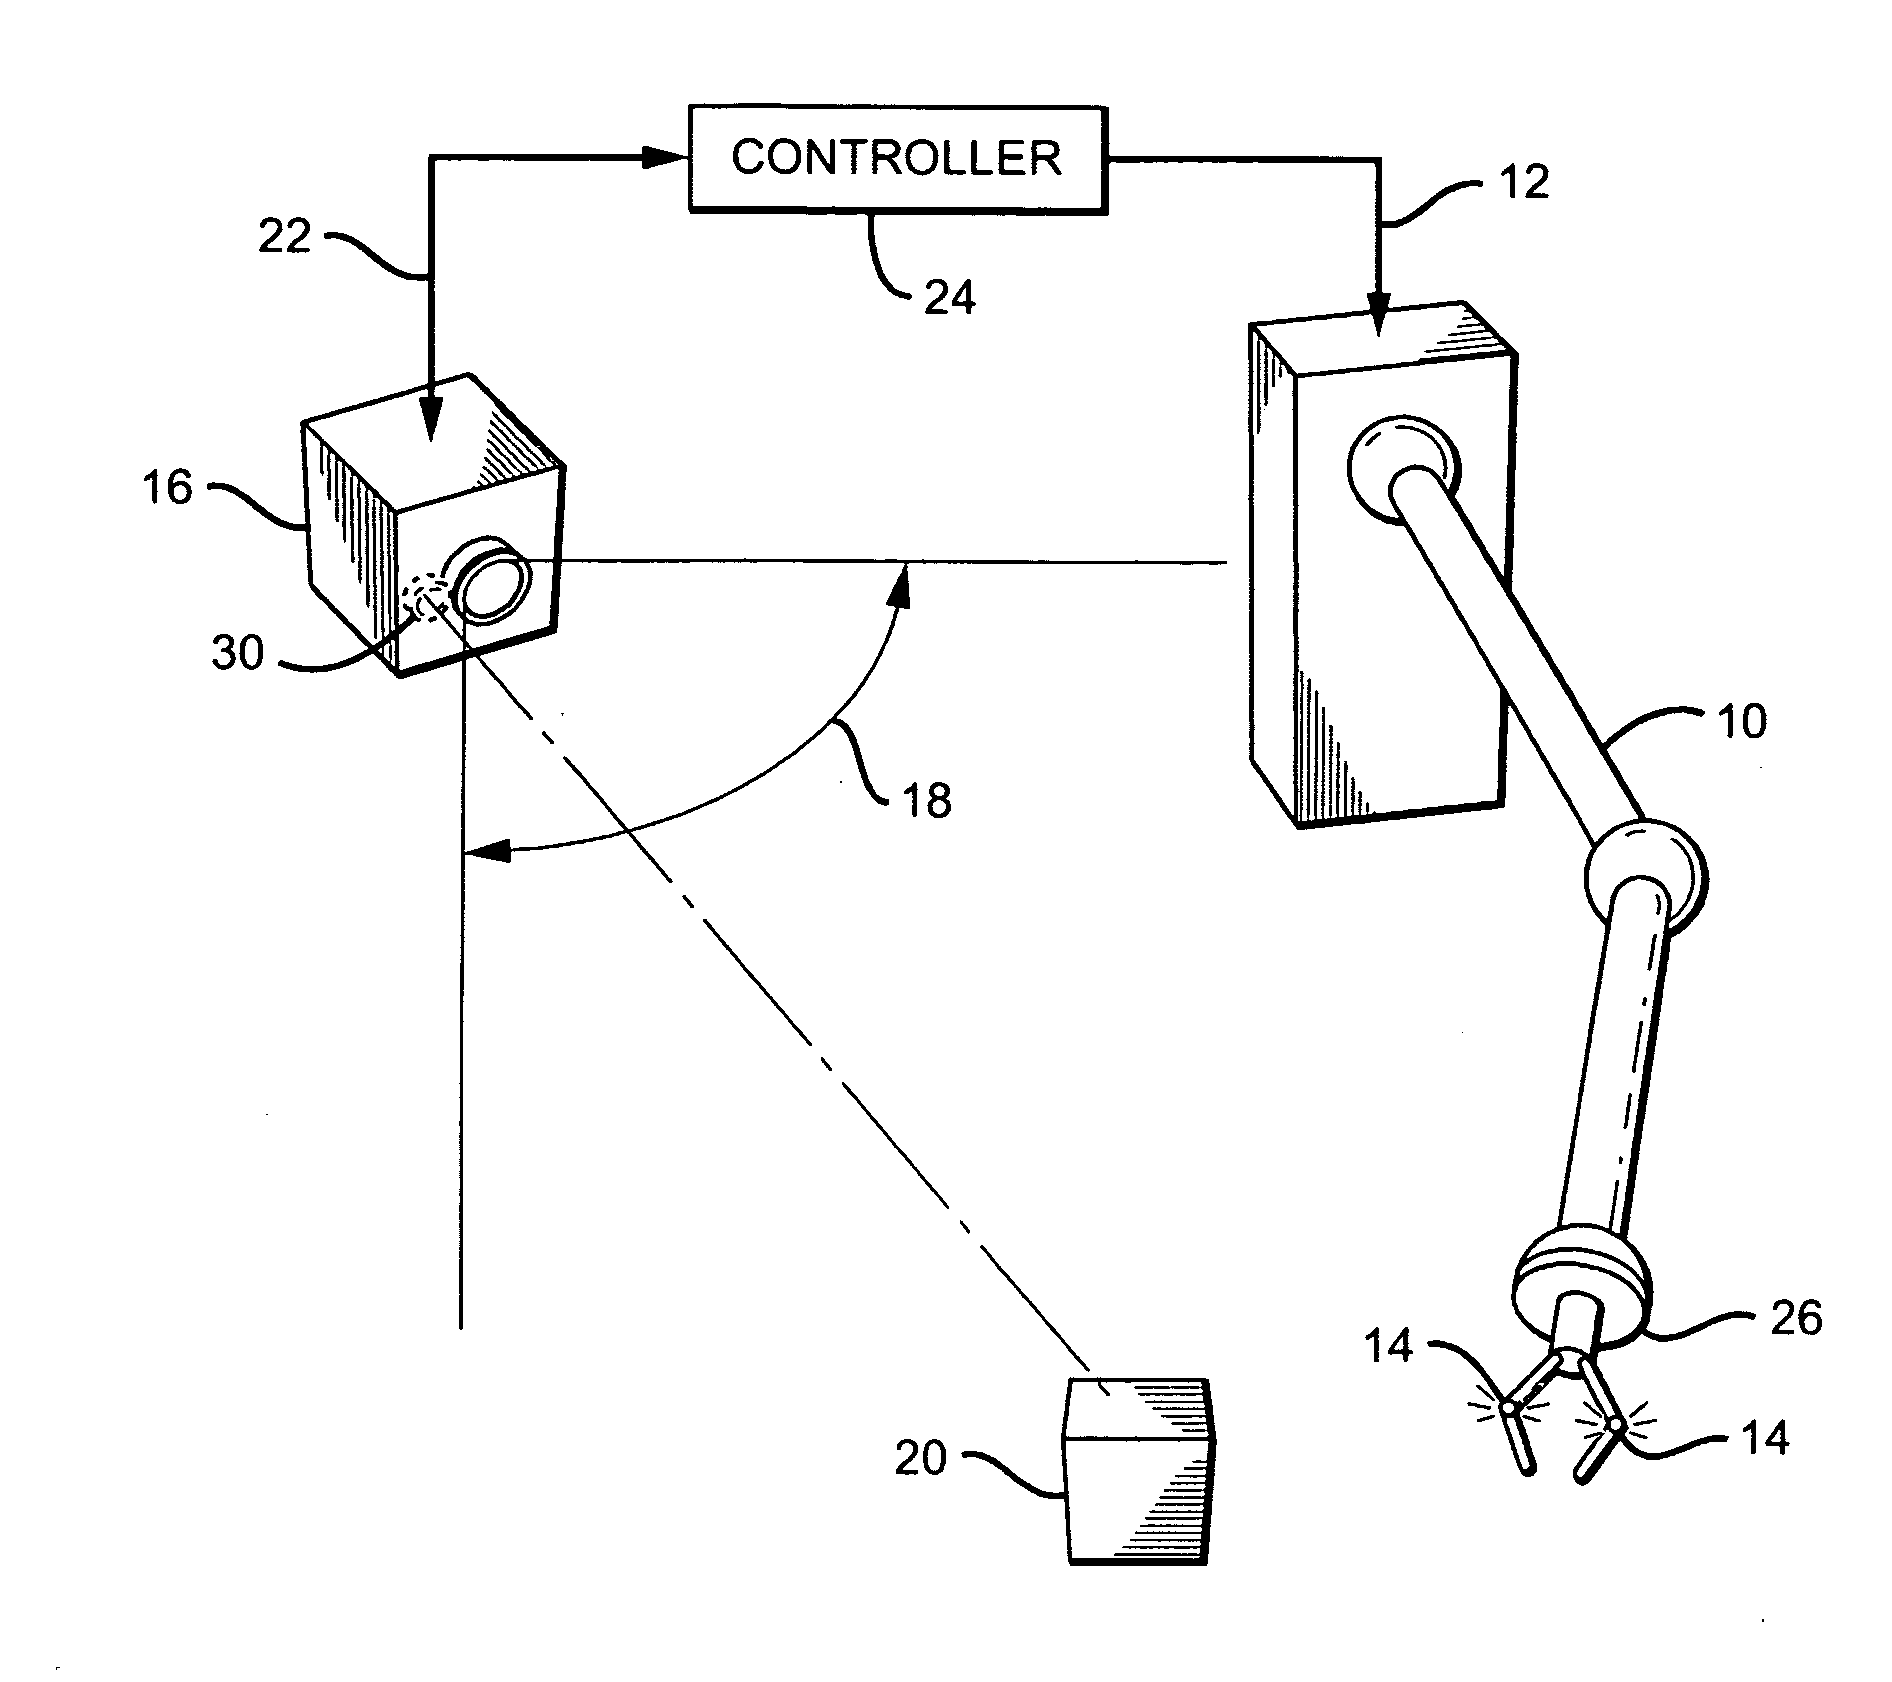 Robotic arm and control system